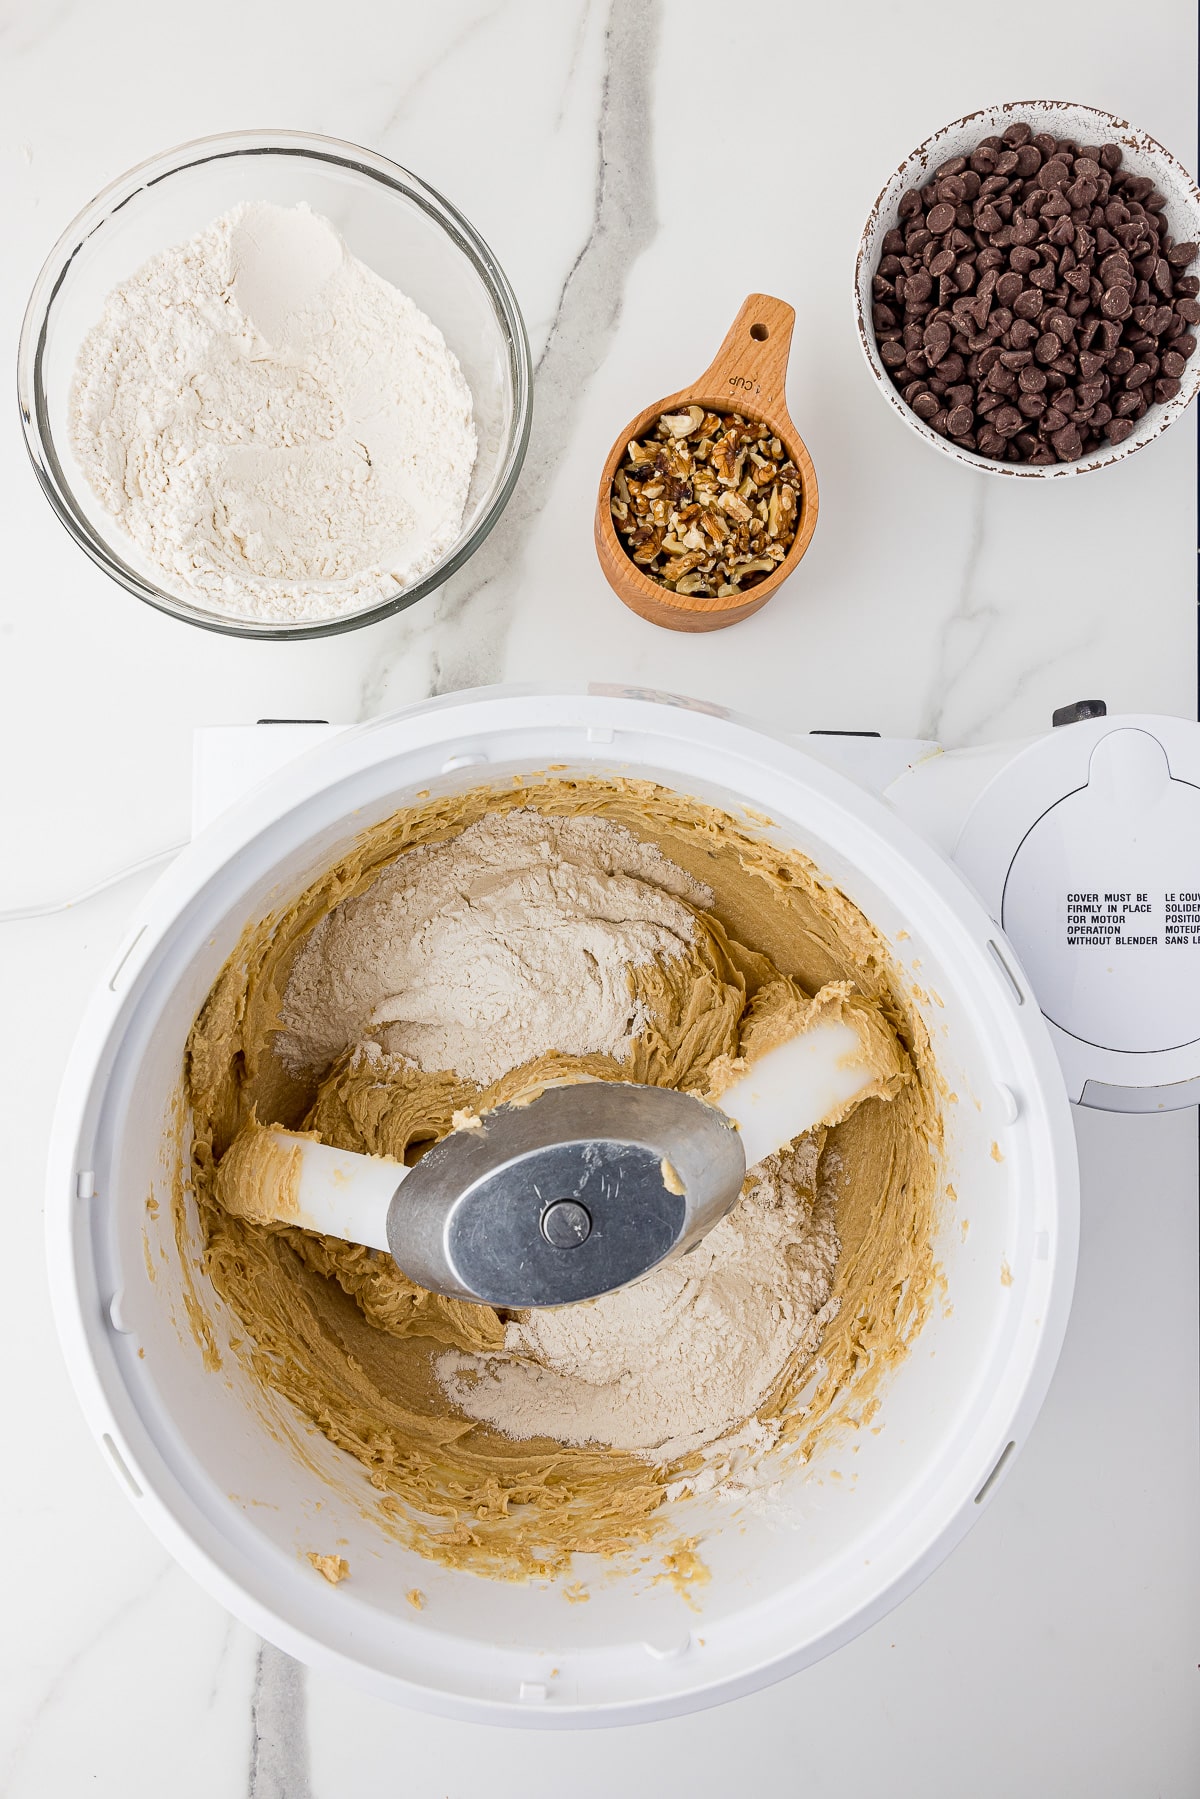 Chocolate chip cookie dough in a bosch mixer with a bowl of chocolate chips and a wooden measuring cup filled with walnuts and a glass bowl with flour in the back all on a white marble countertop